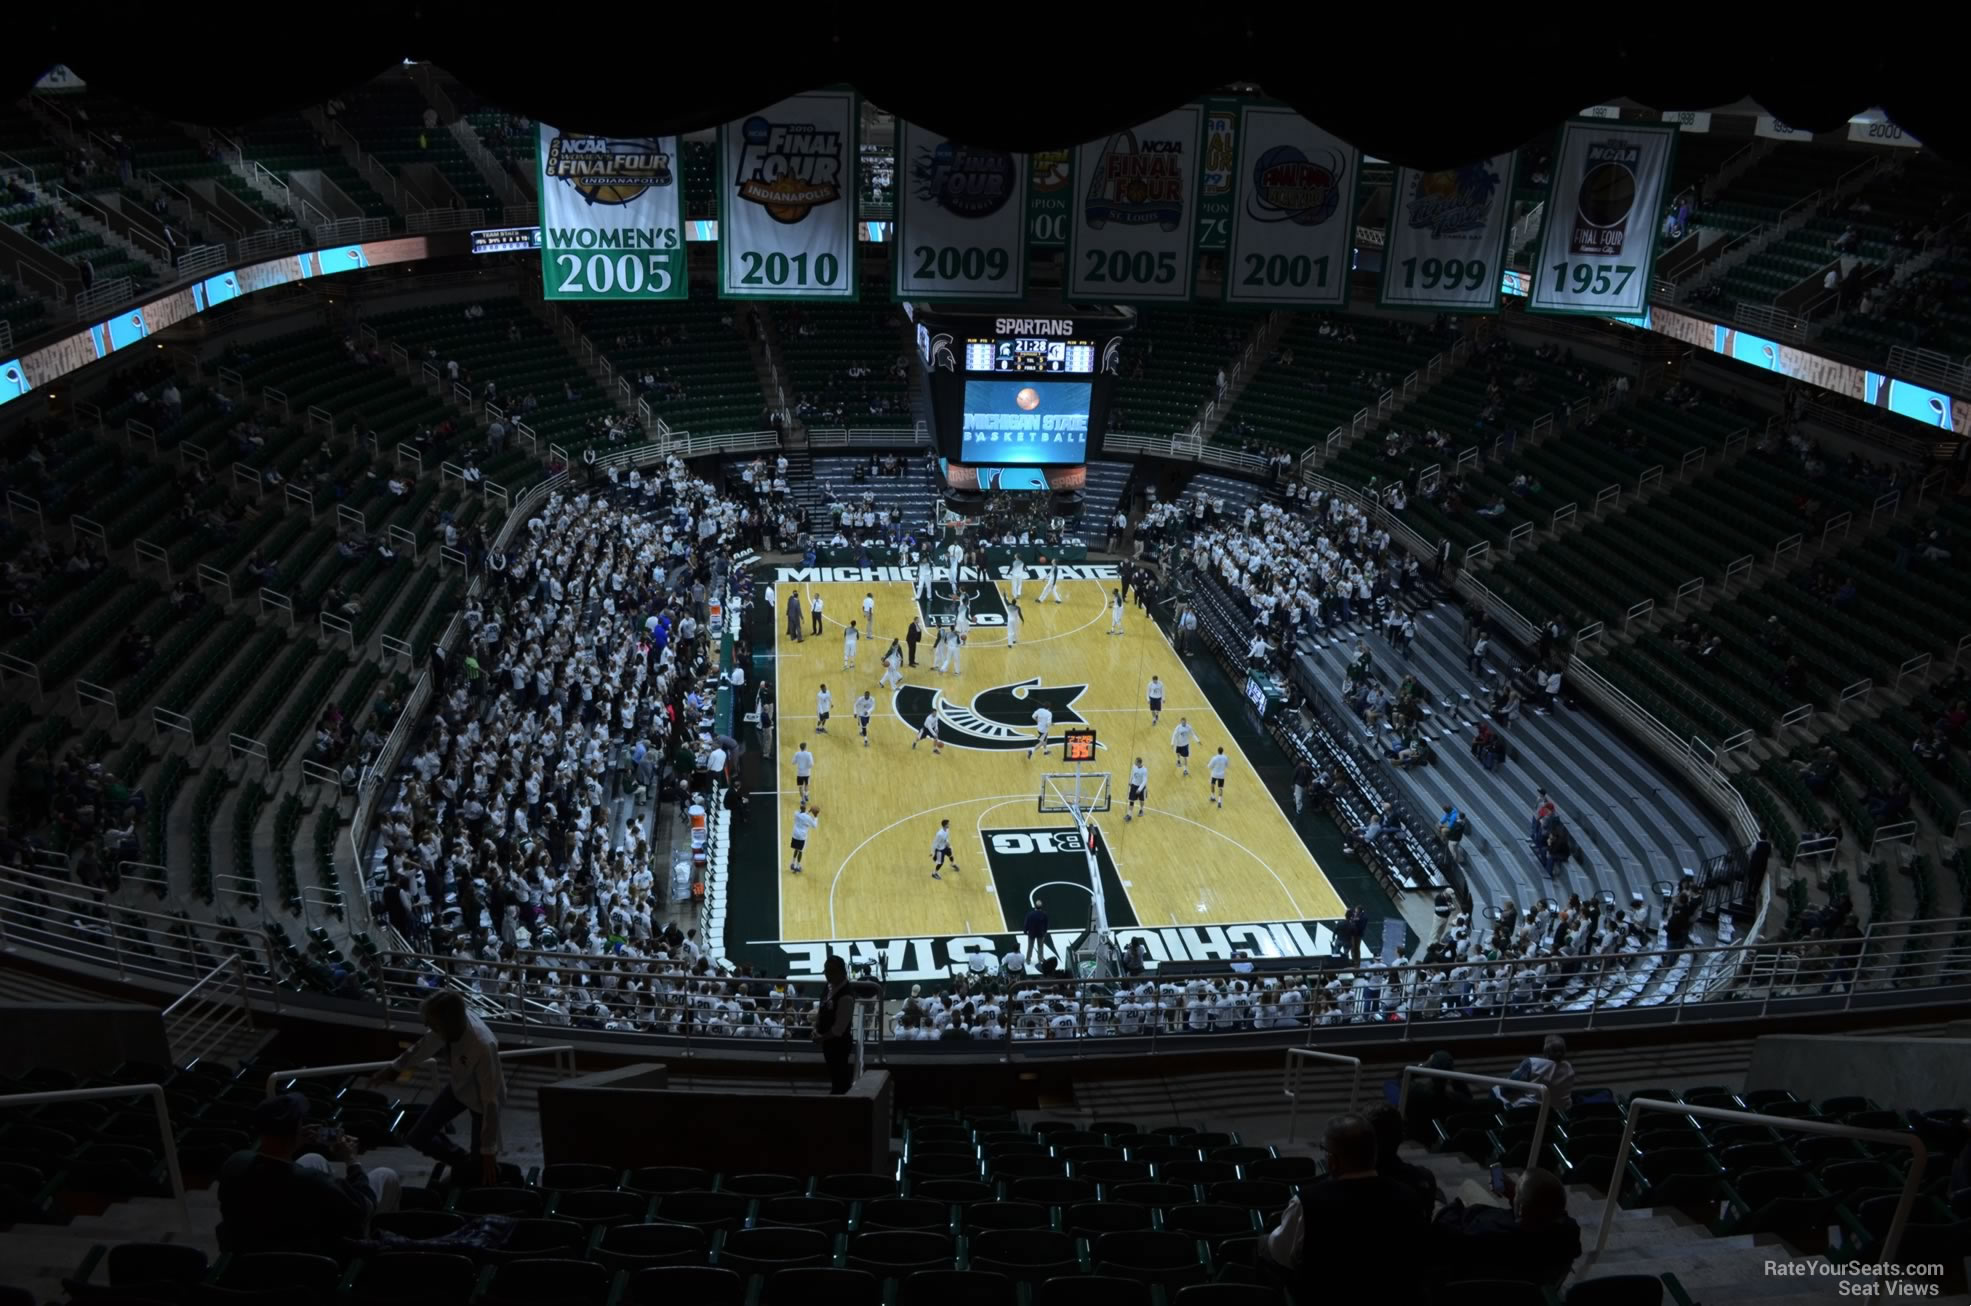 section 201, row 15 seat view  - breslin center